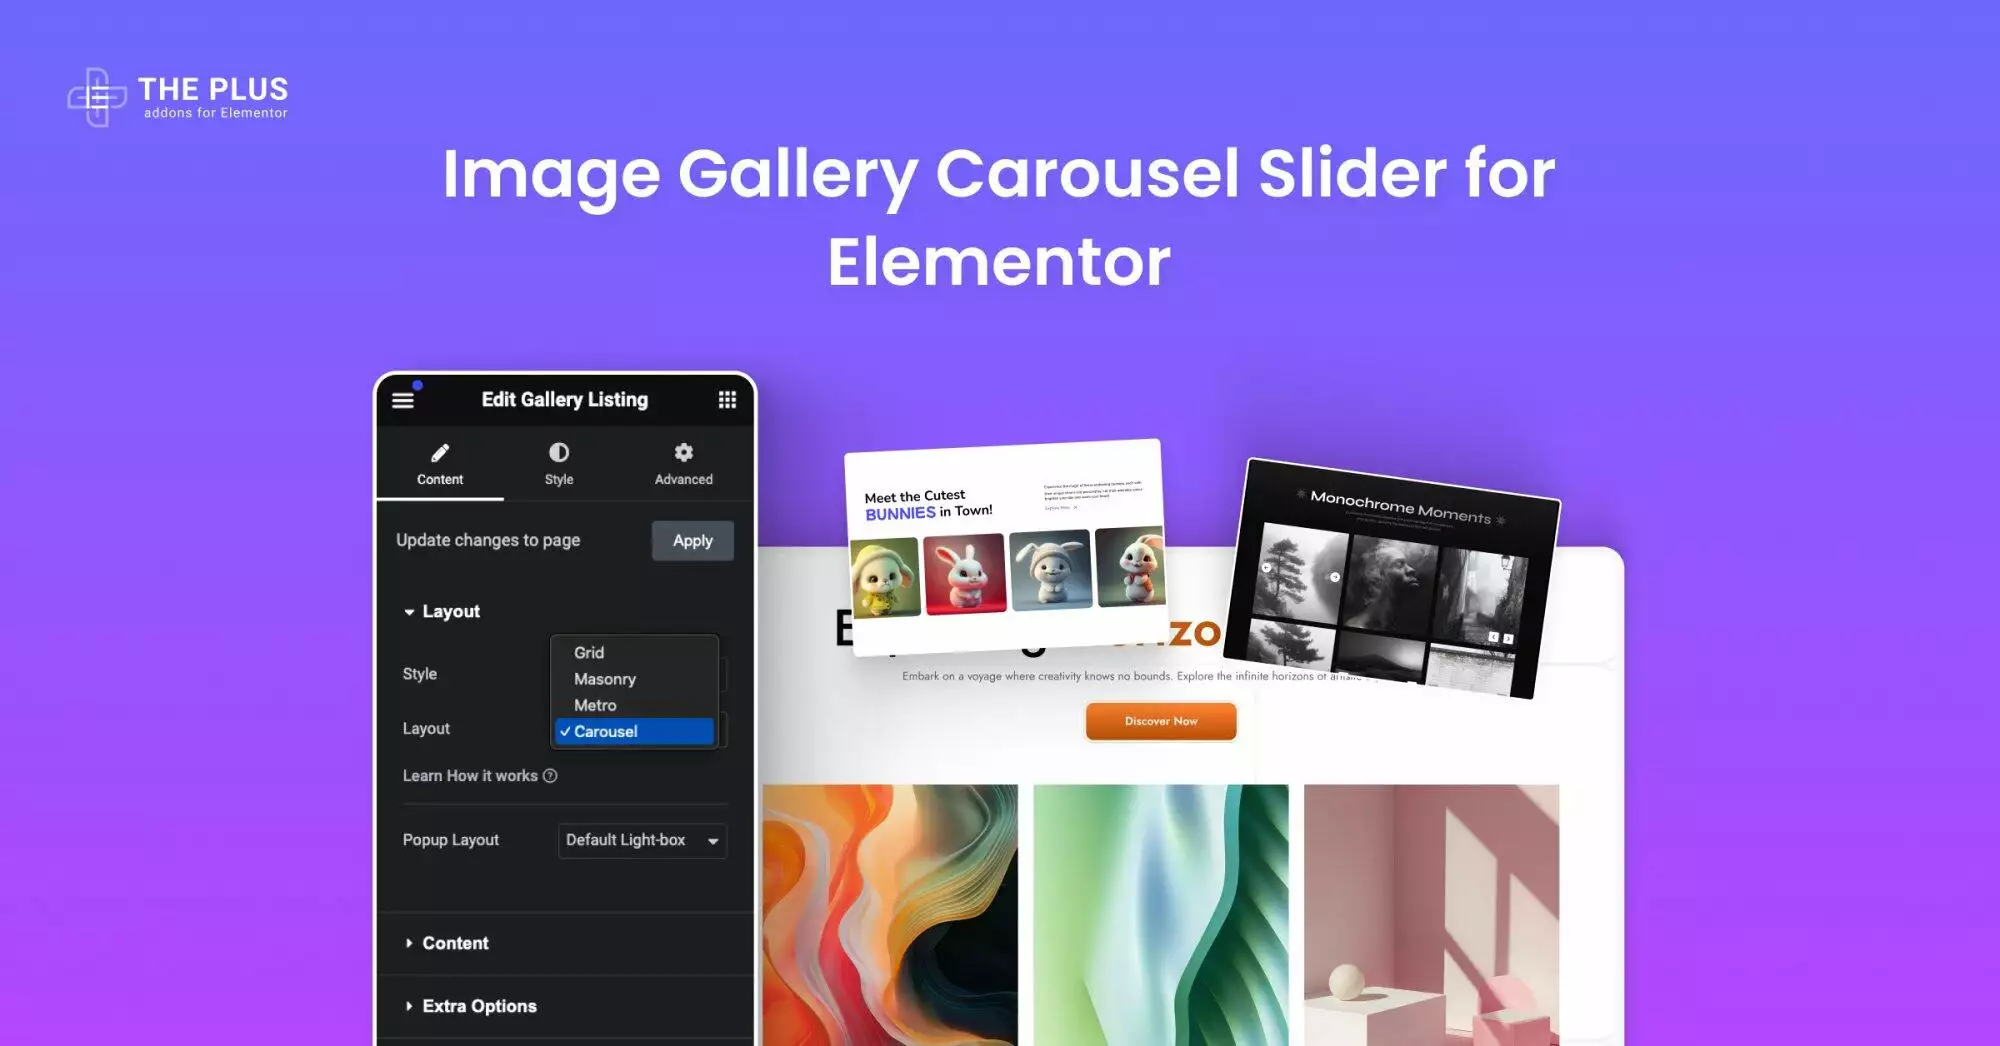 Feature image image gallery carousel slider for elementor image gallery carousel slider for elementor from the plus addons for elementor